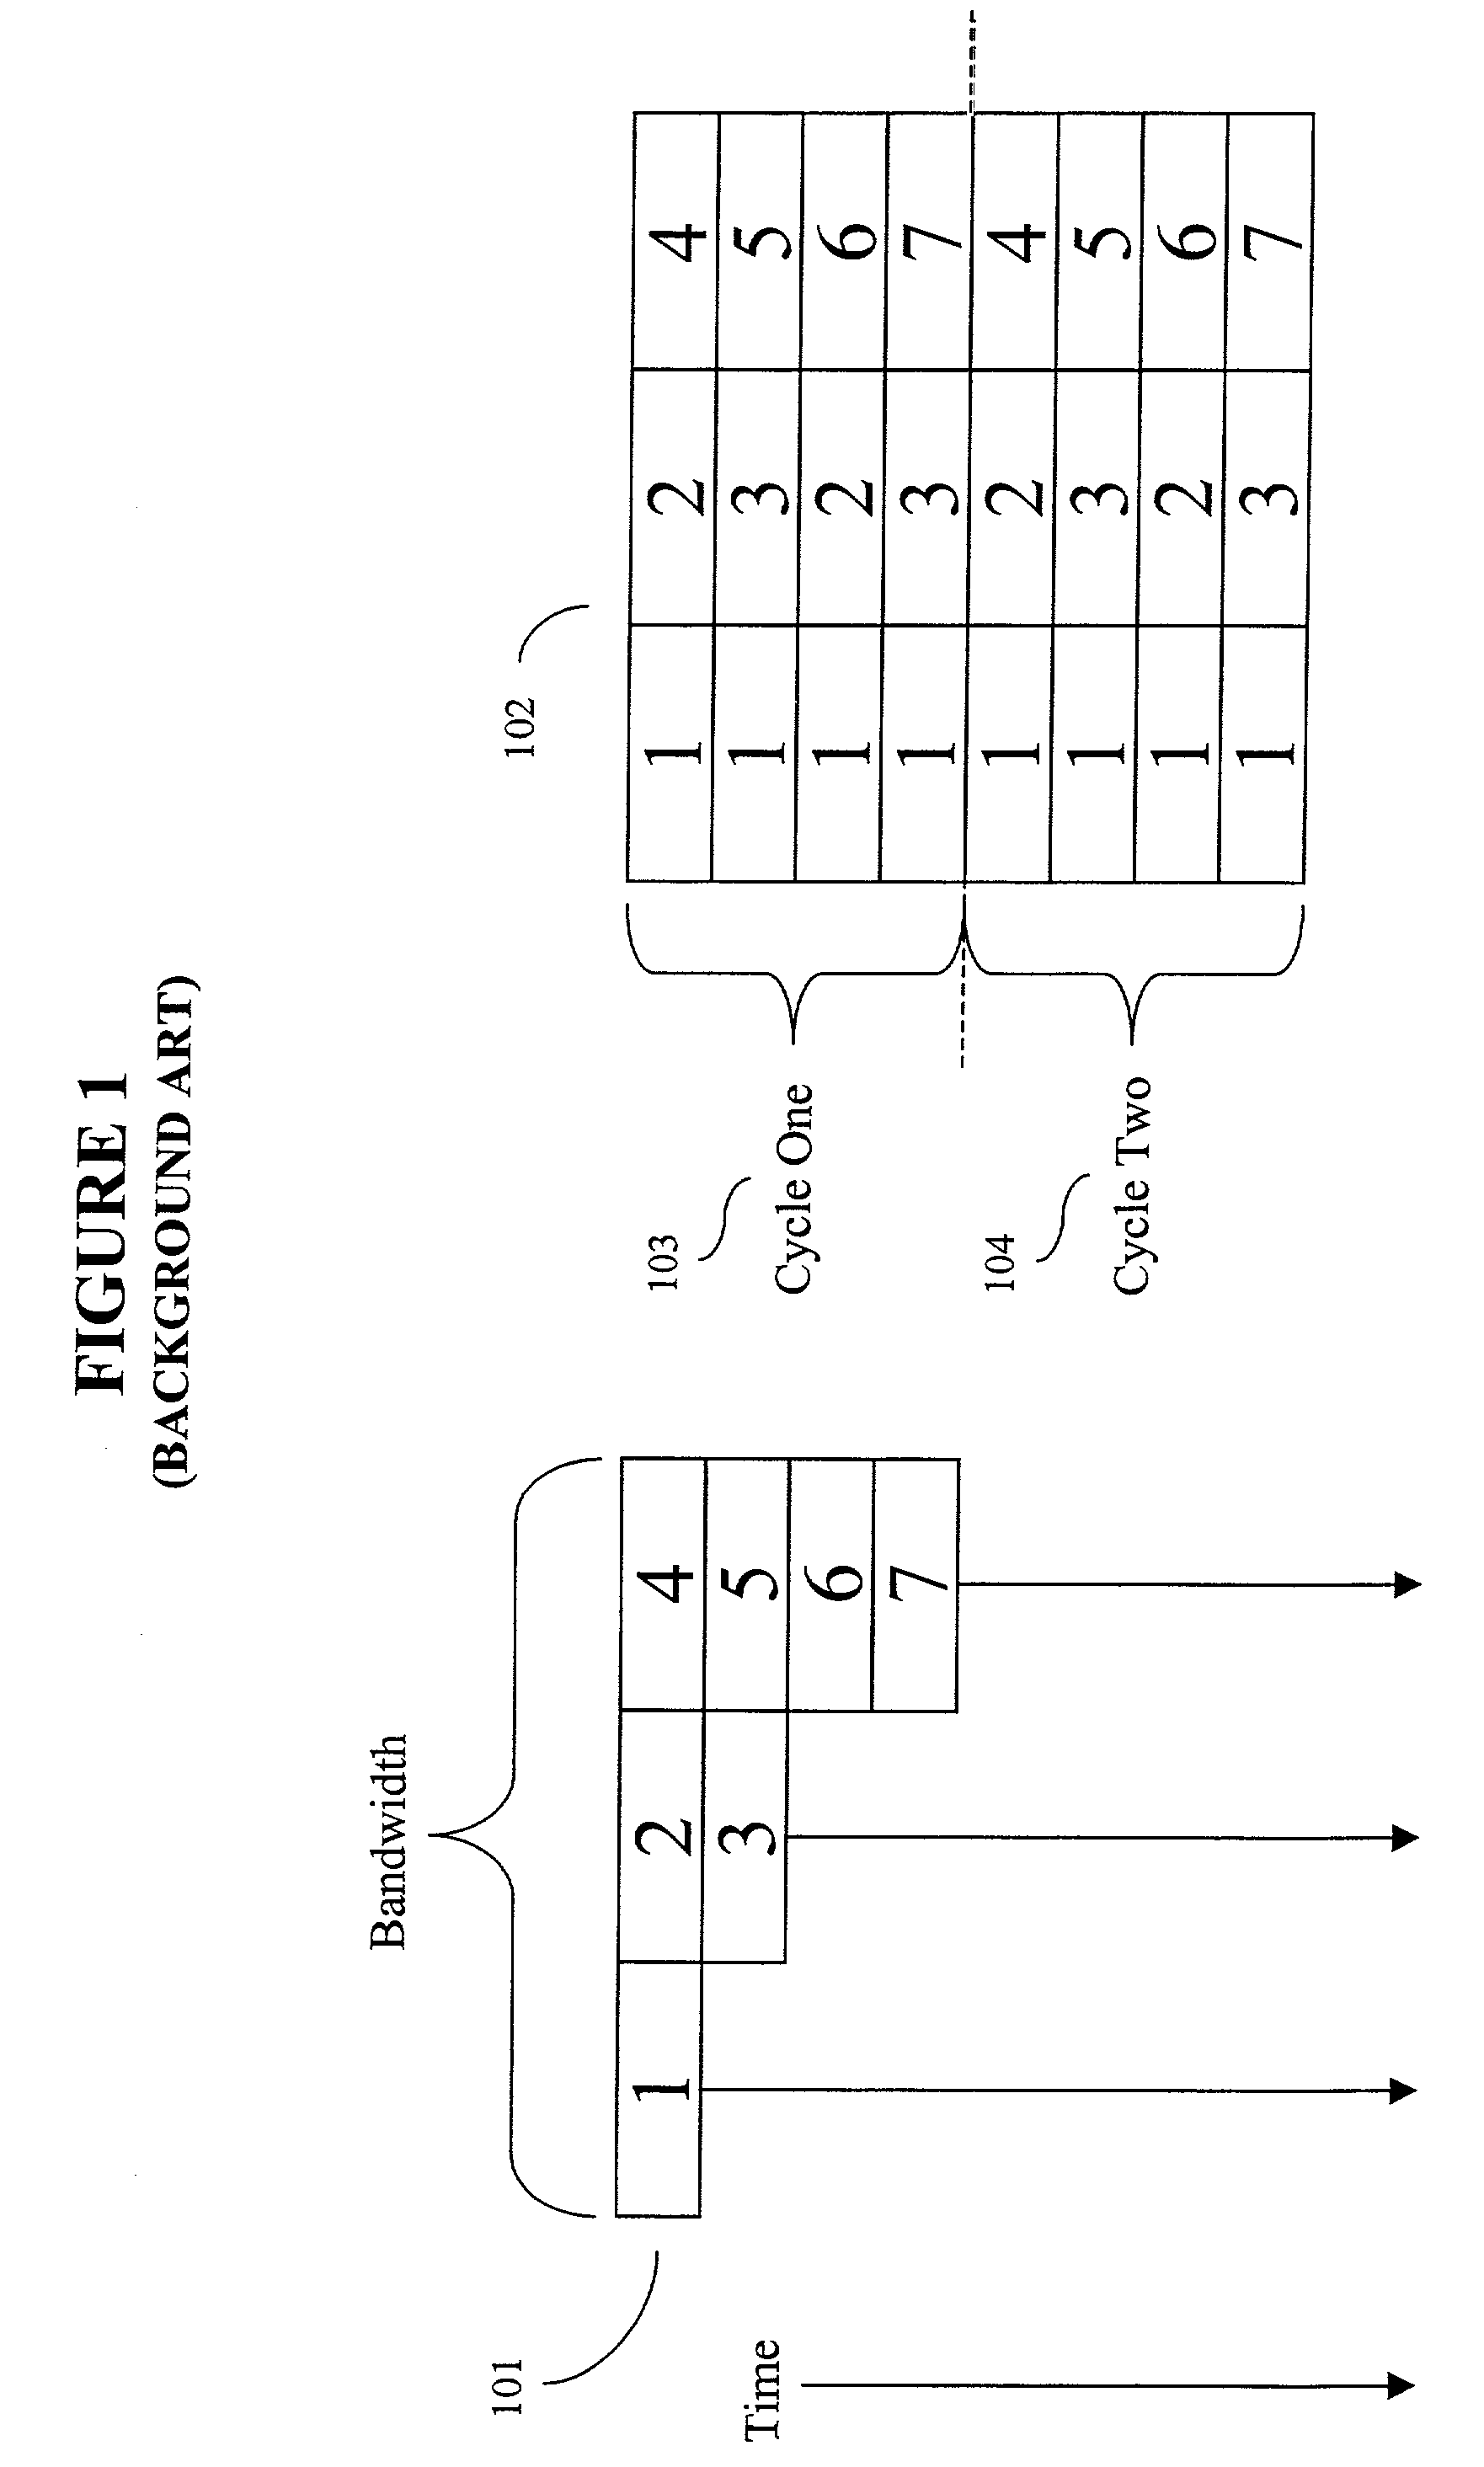 System, method, and computer program product for sharing bandwidth in a wireless personal area network or a wireless local area network